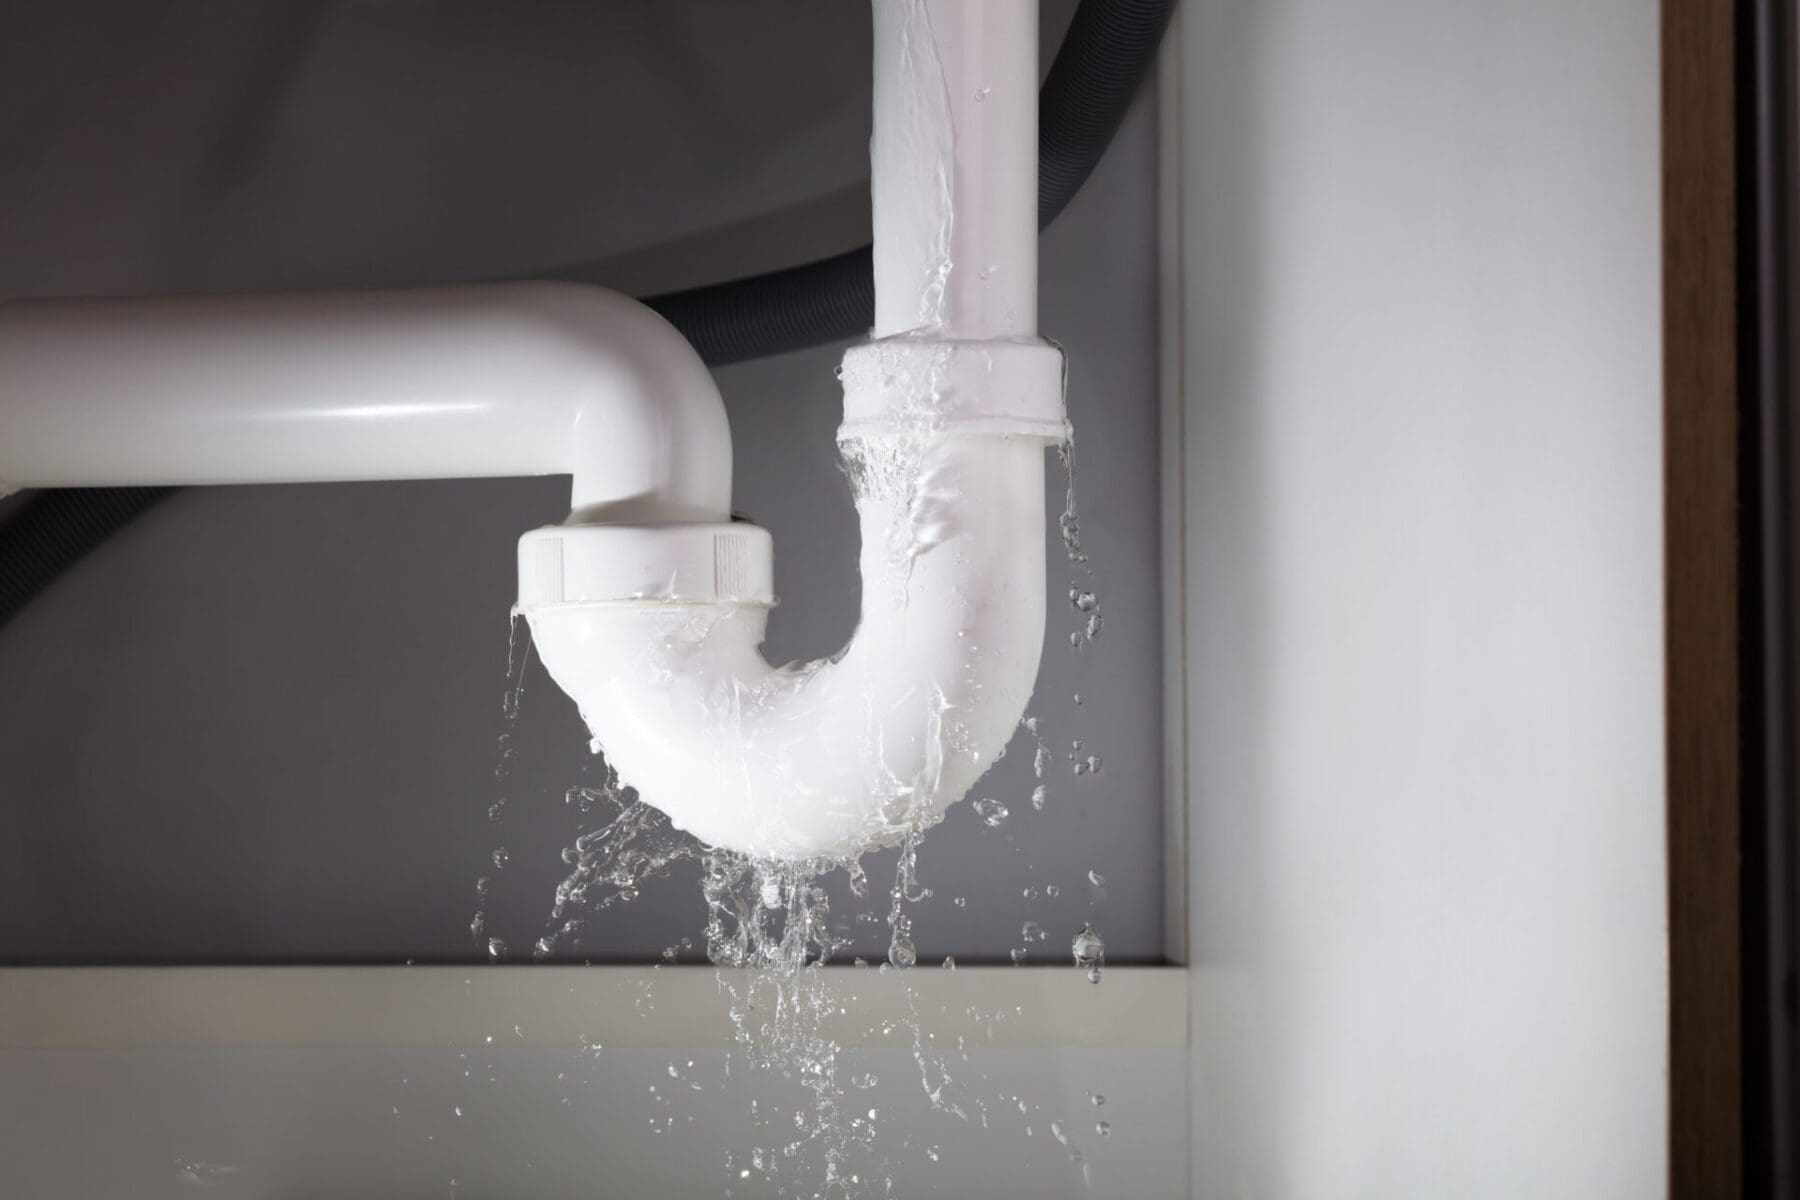 Leaking Sink? Common Causes & How to Fix It